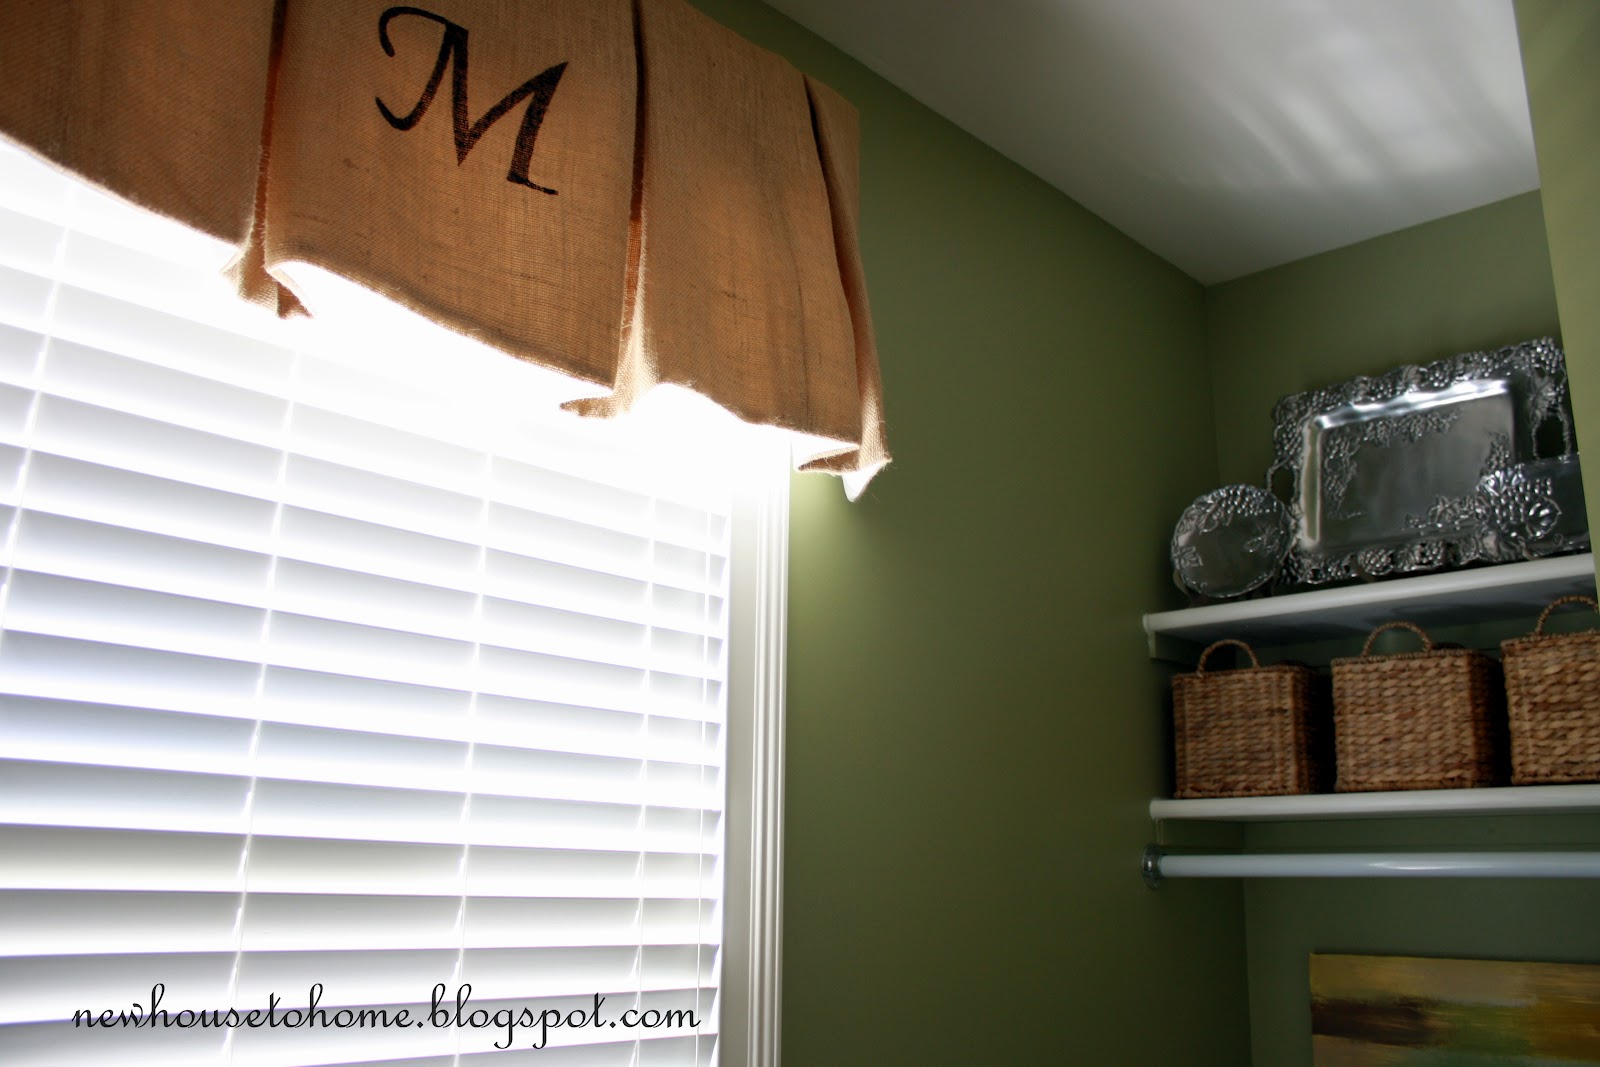 New House to Home: Laundry Room Reveal